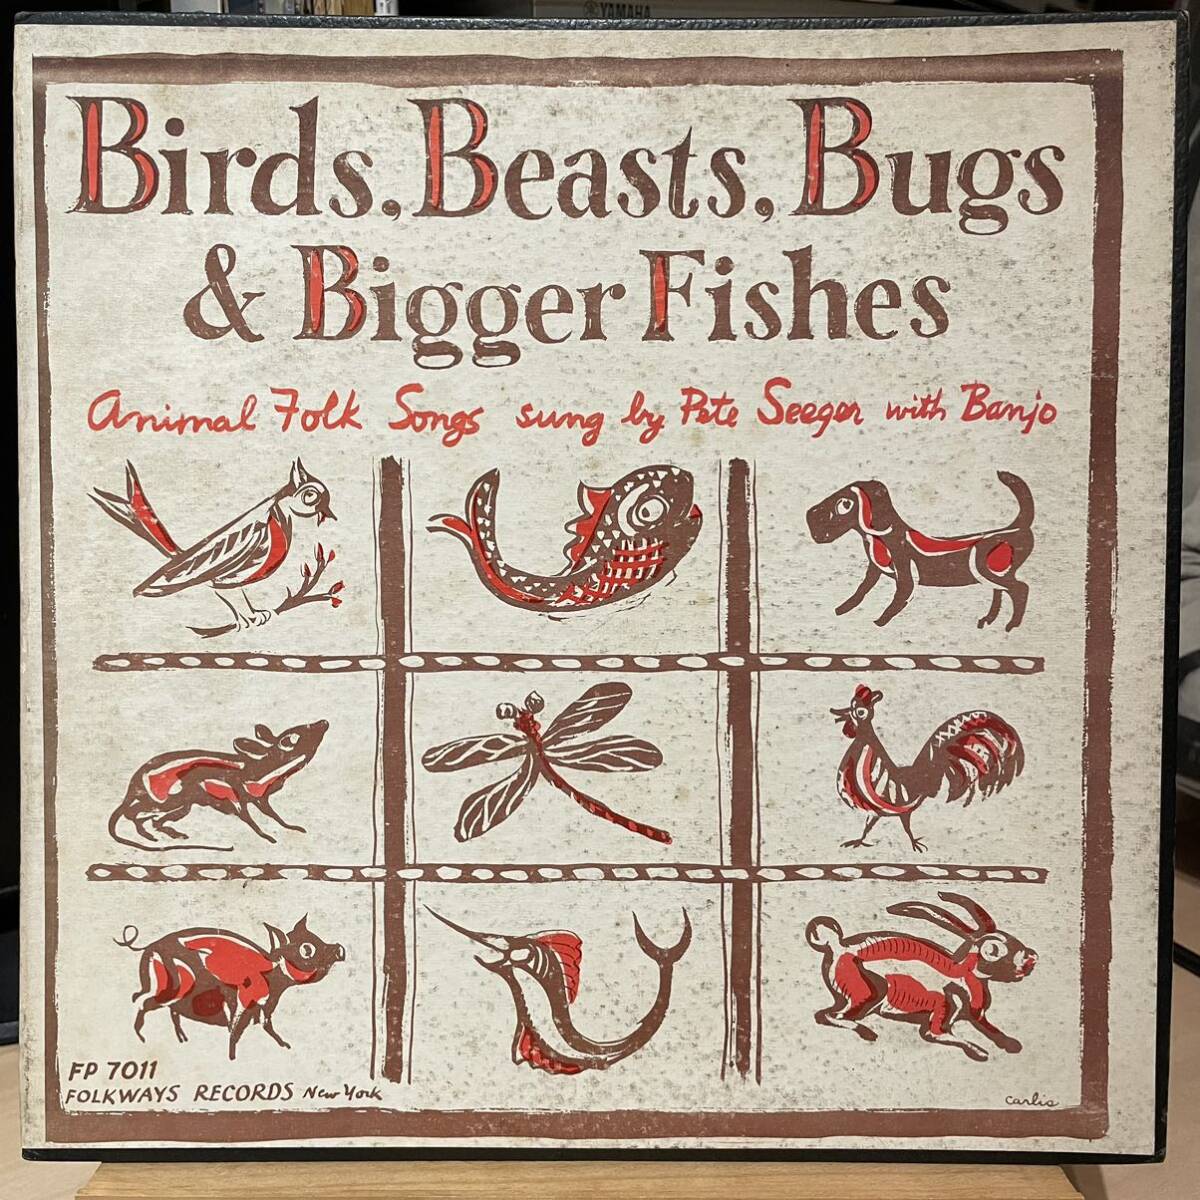 【US盤Folkways】Pete Seeger Birds Beasts Bugs And Bigger Fishes (1955) FP 7011 10inch 深溝あり50年代深青レーベル レアの画像1